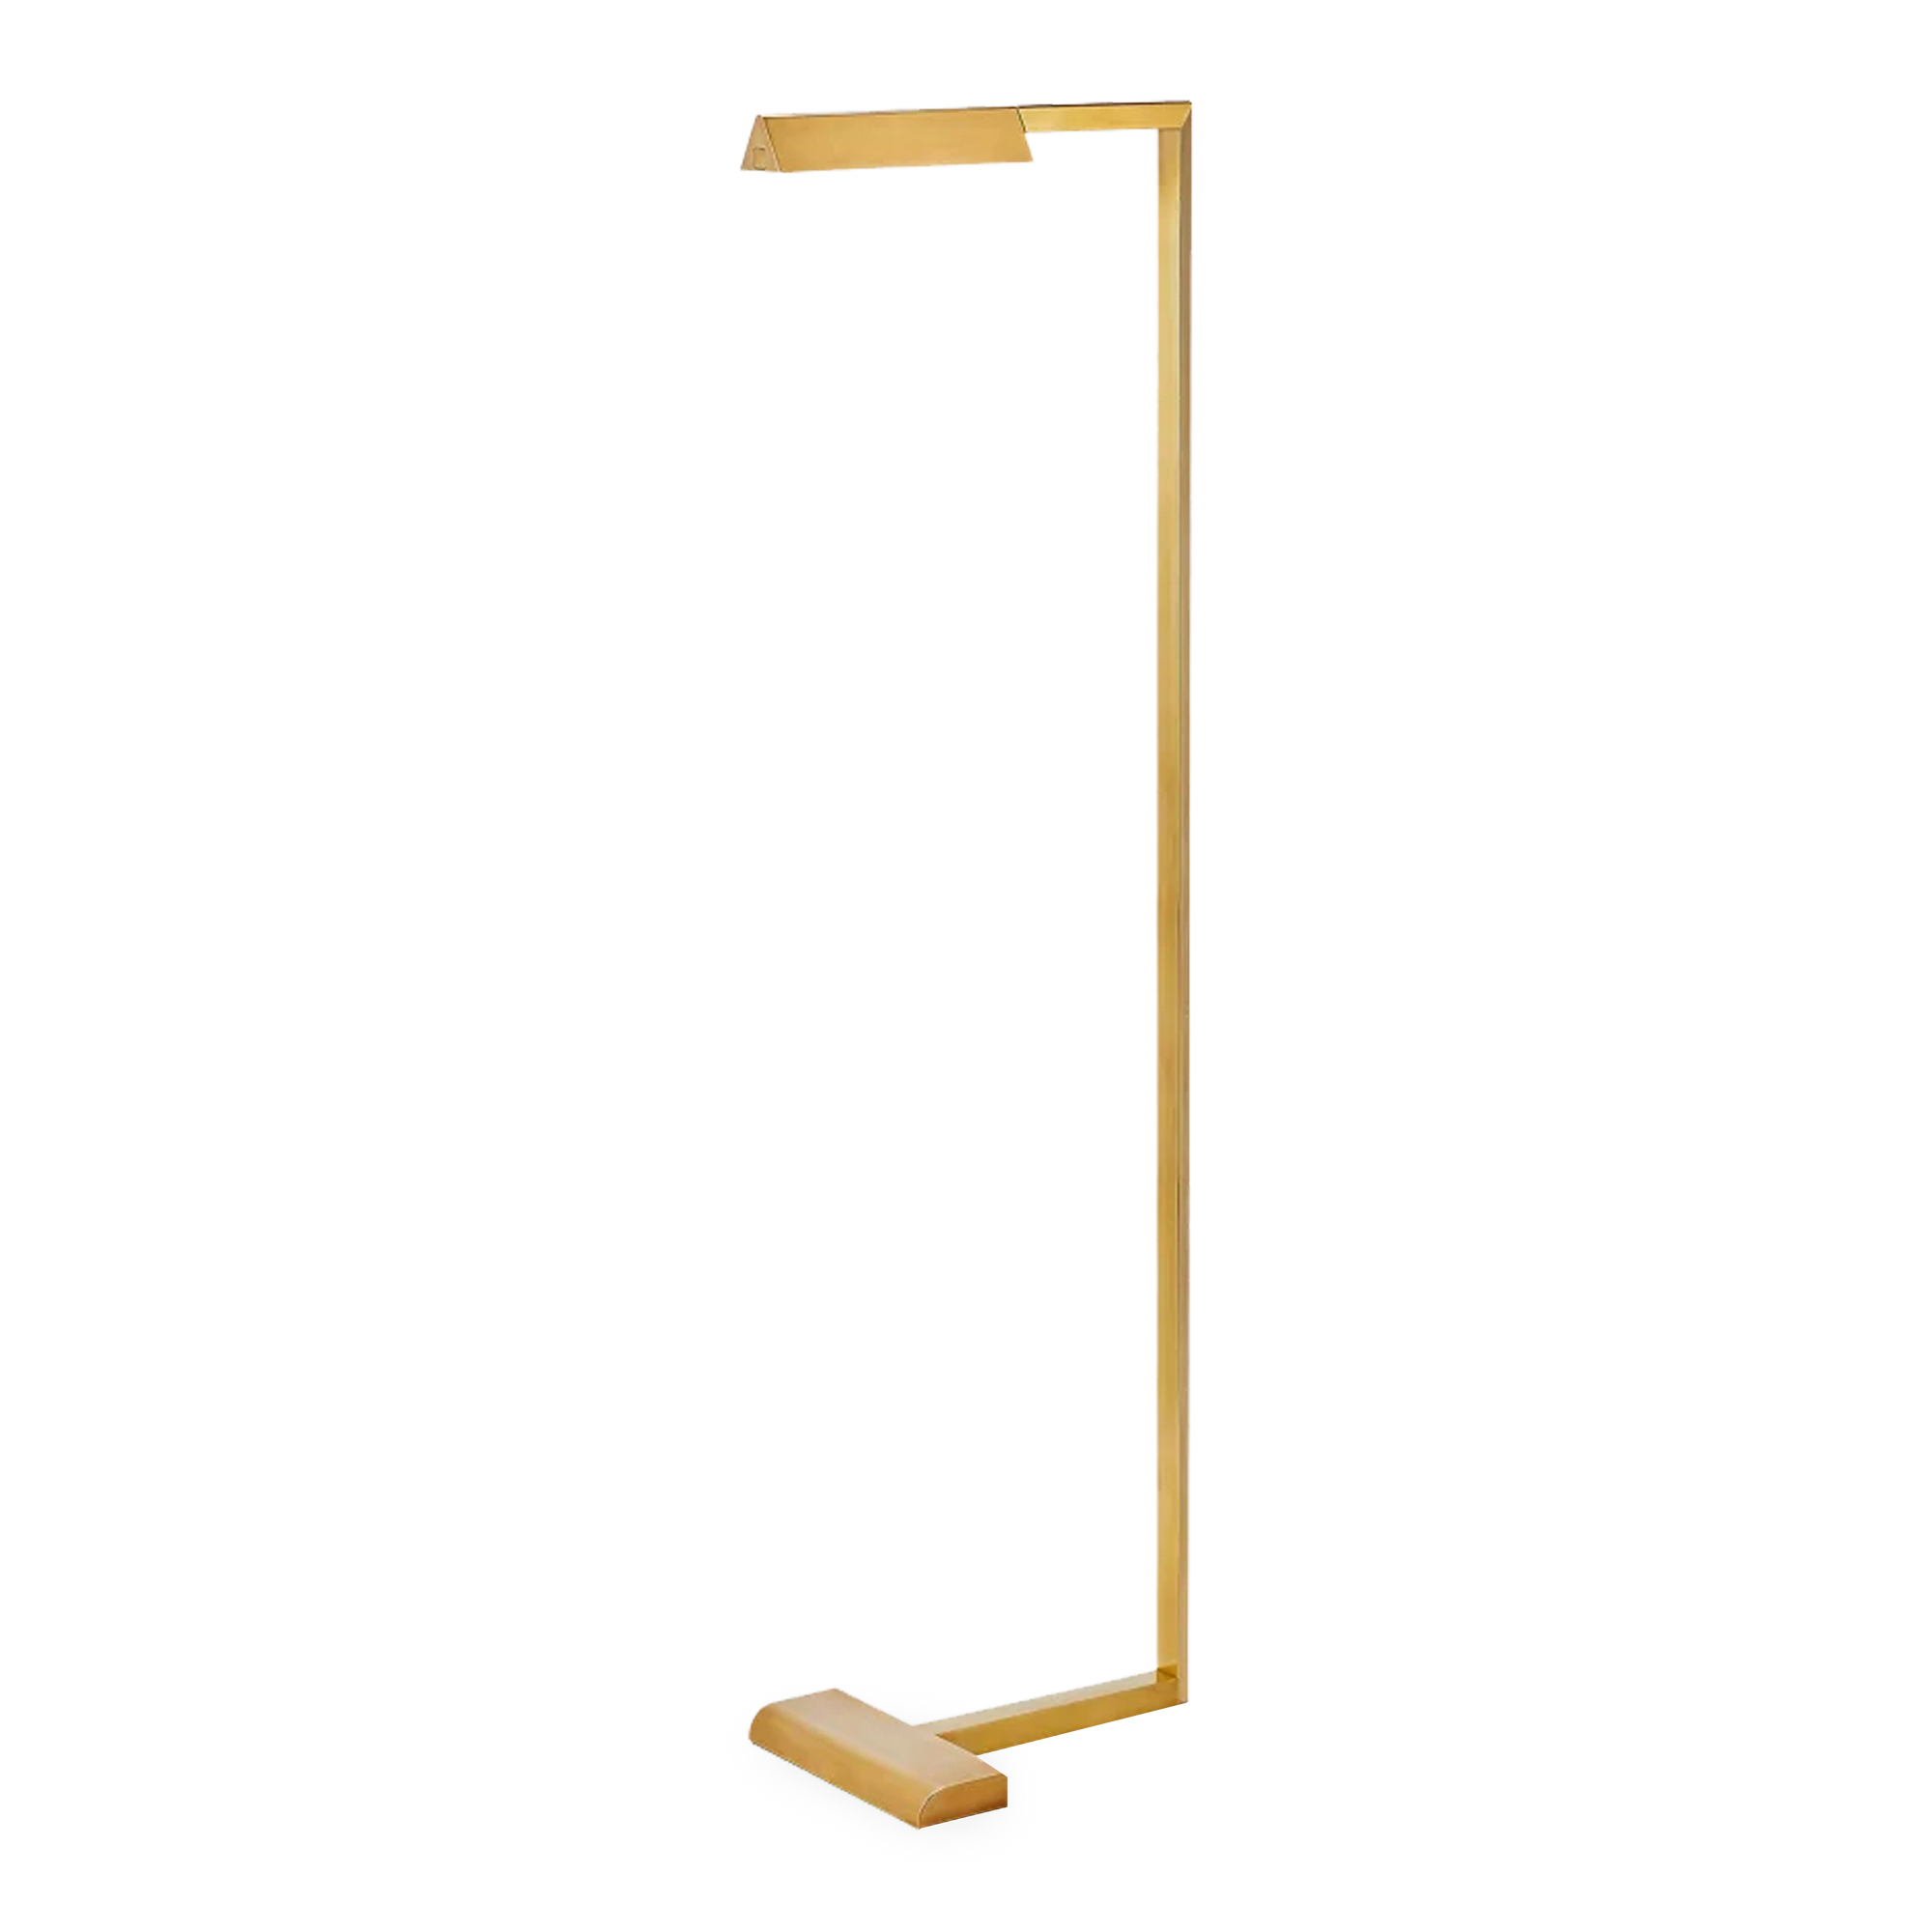 Whether its for reading at night or illuminating a room the Dessau Floor Lamp is perfect with its own built-in dimmer.